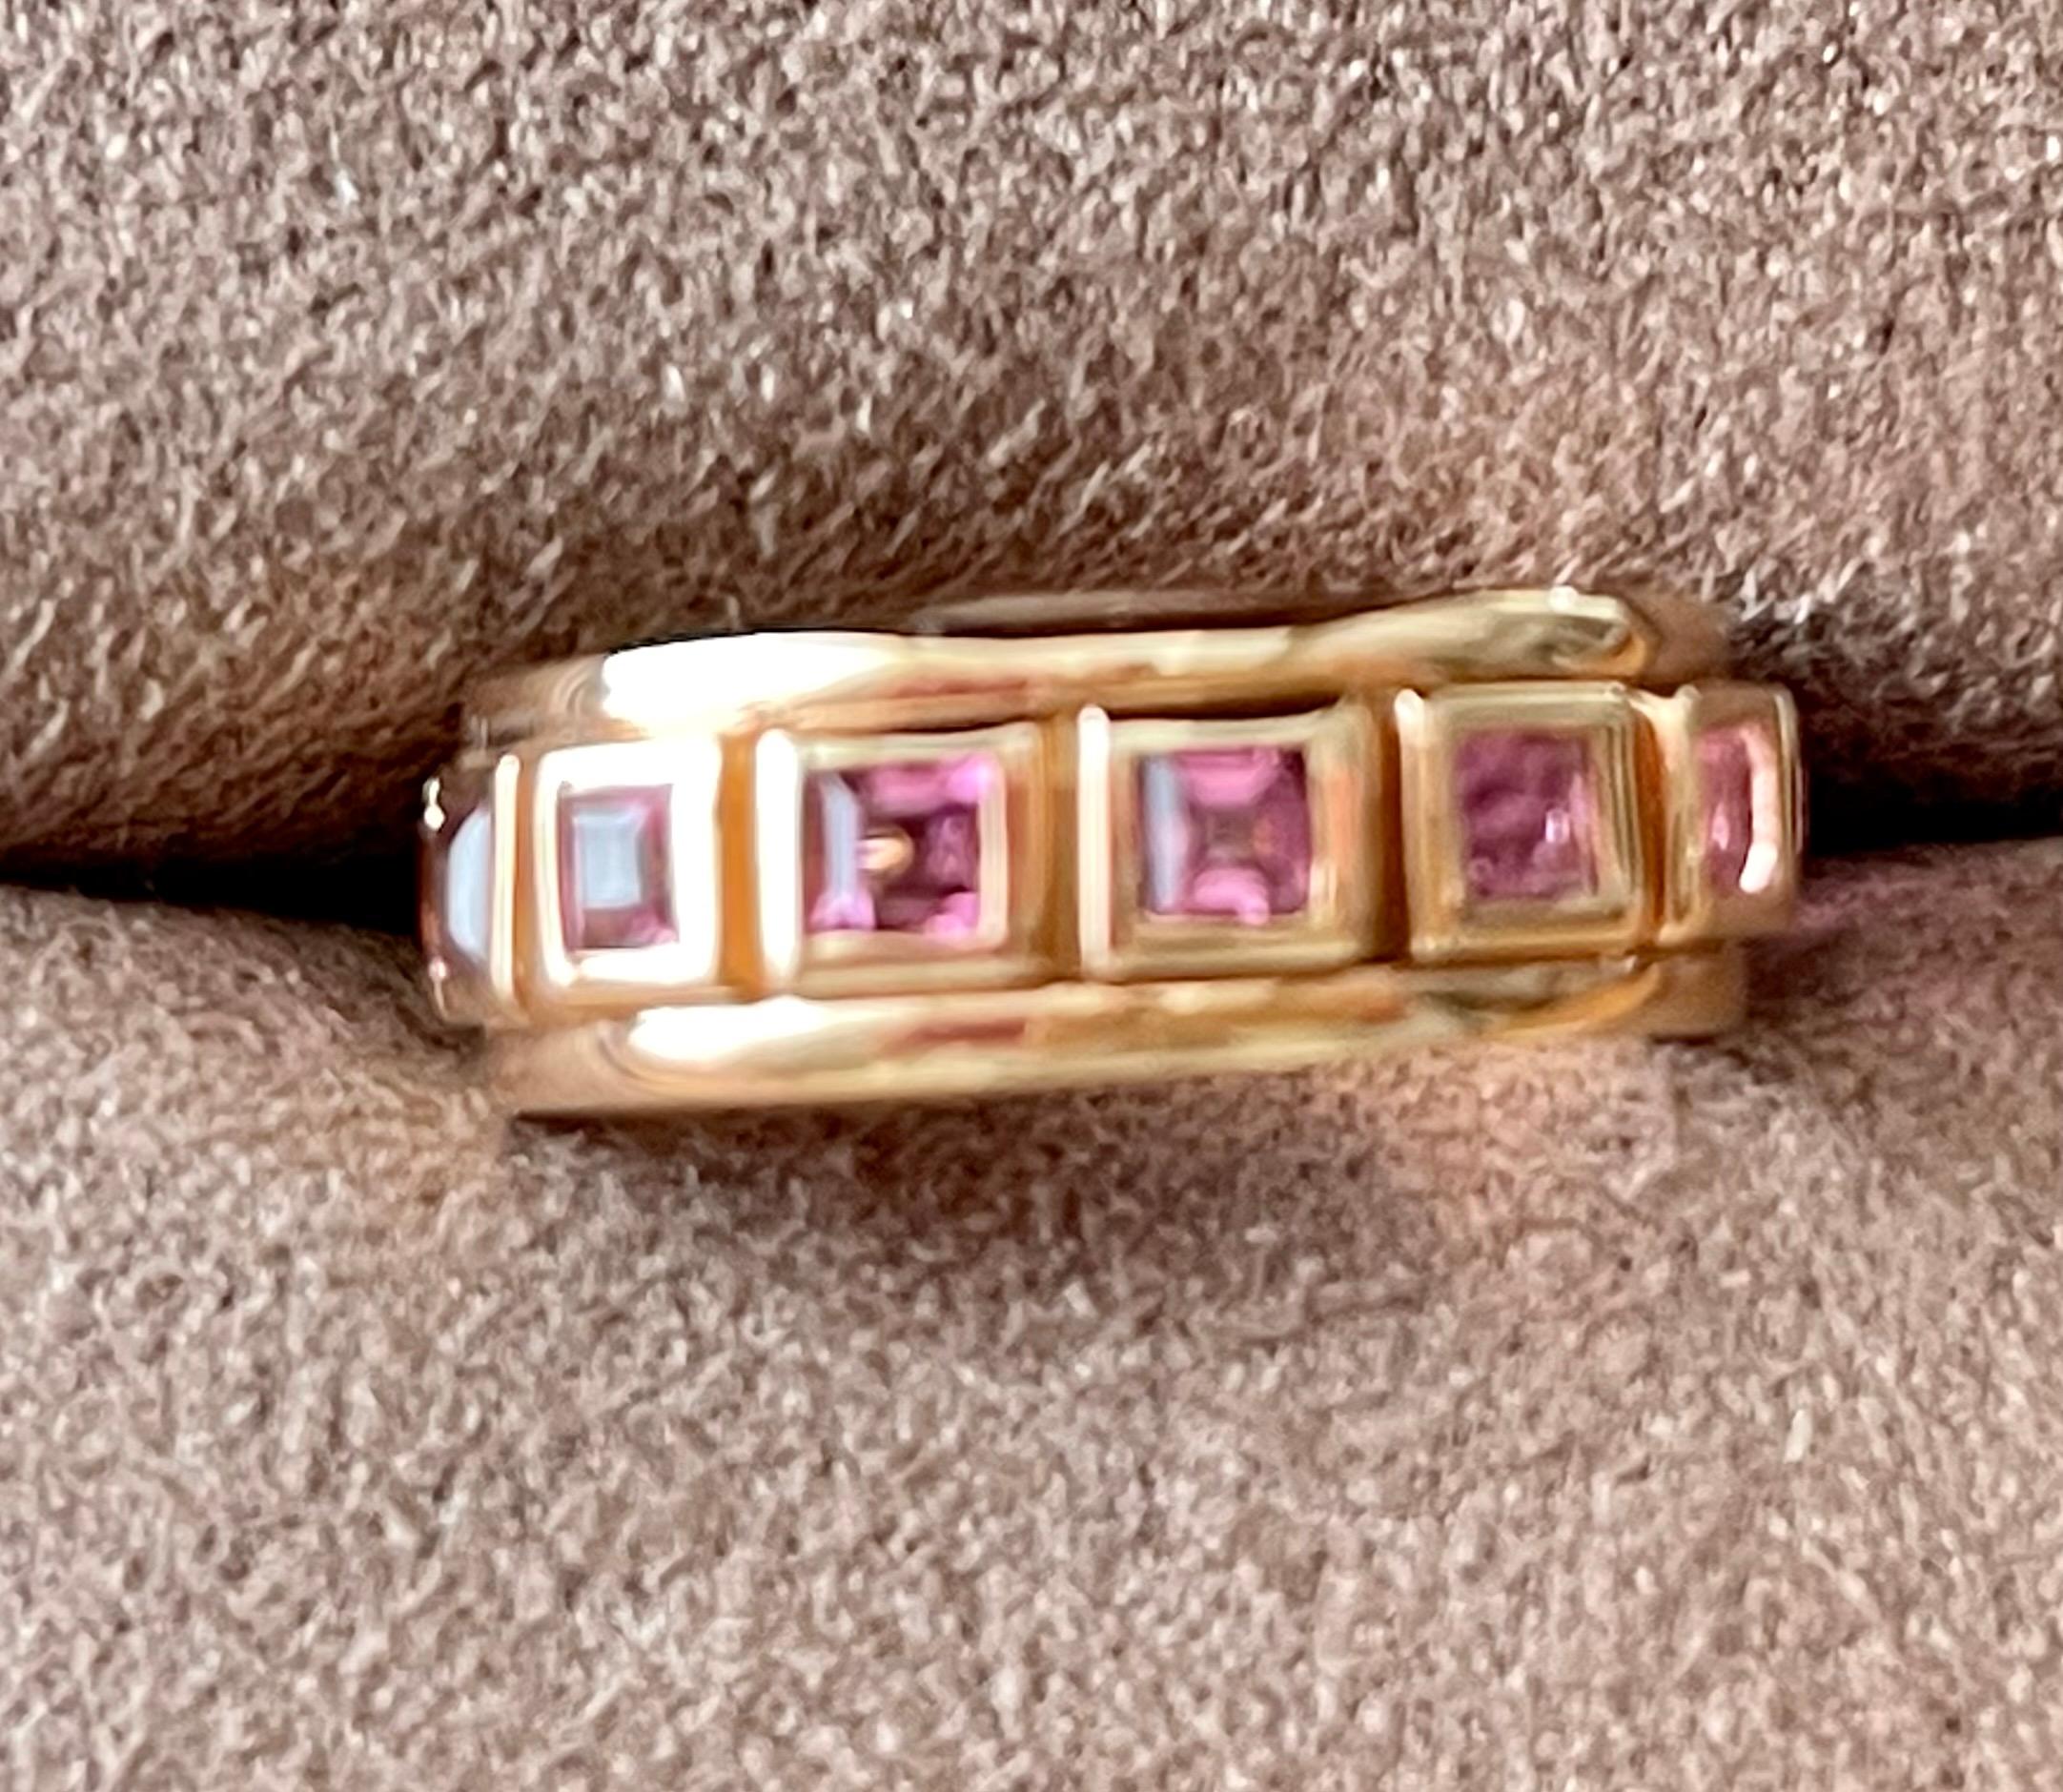 Solid 18 K rose Gold Eternity Ring set with 14 square cut pink Tourmalines weighing 1.63 ct in a solid bezel channel setting. 
Each  stone is faceted and well-matched in shape and color. Natural variations in hue and intensity add to the beauty of